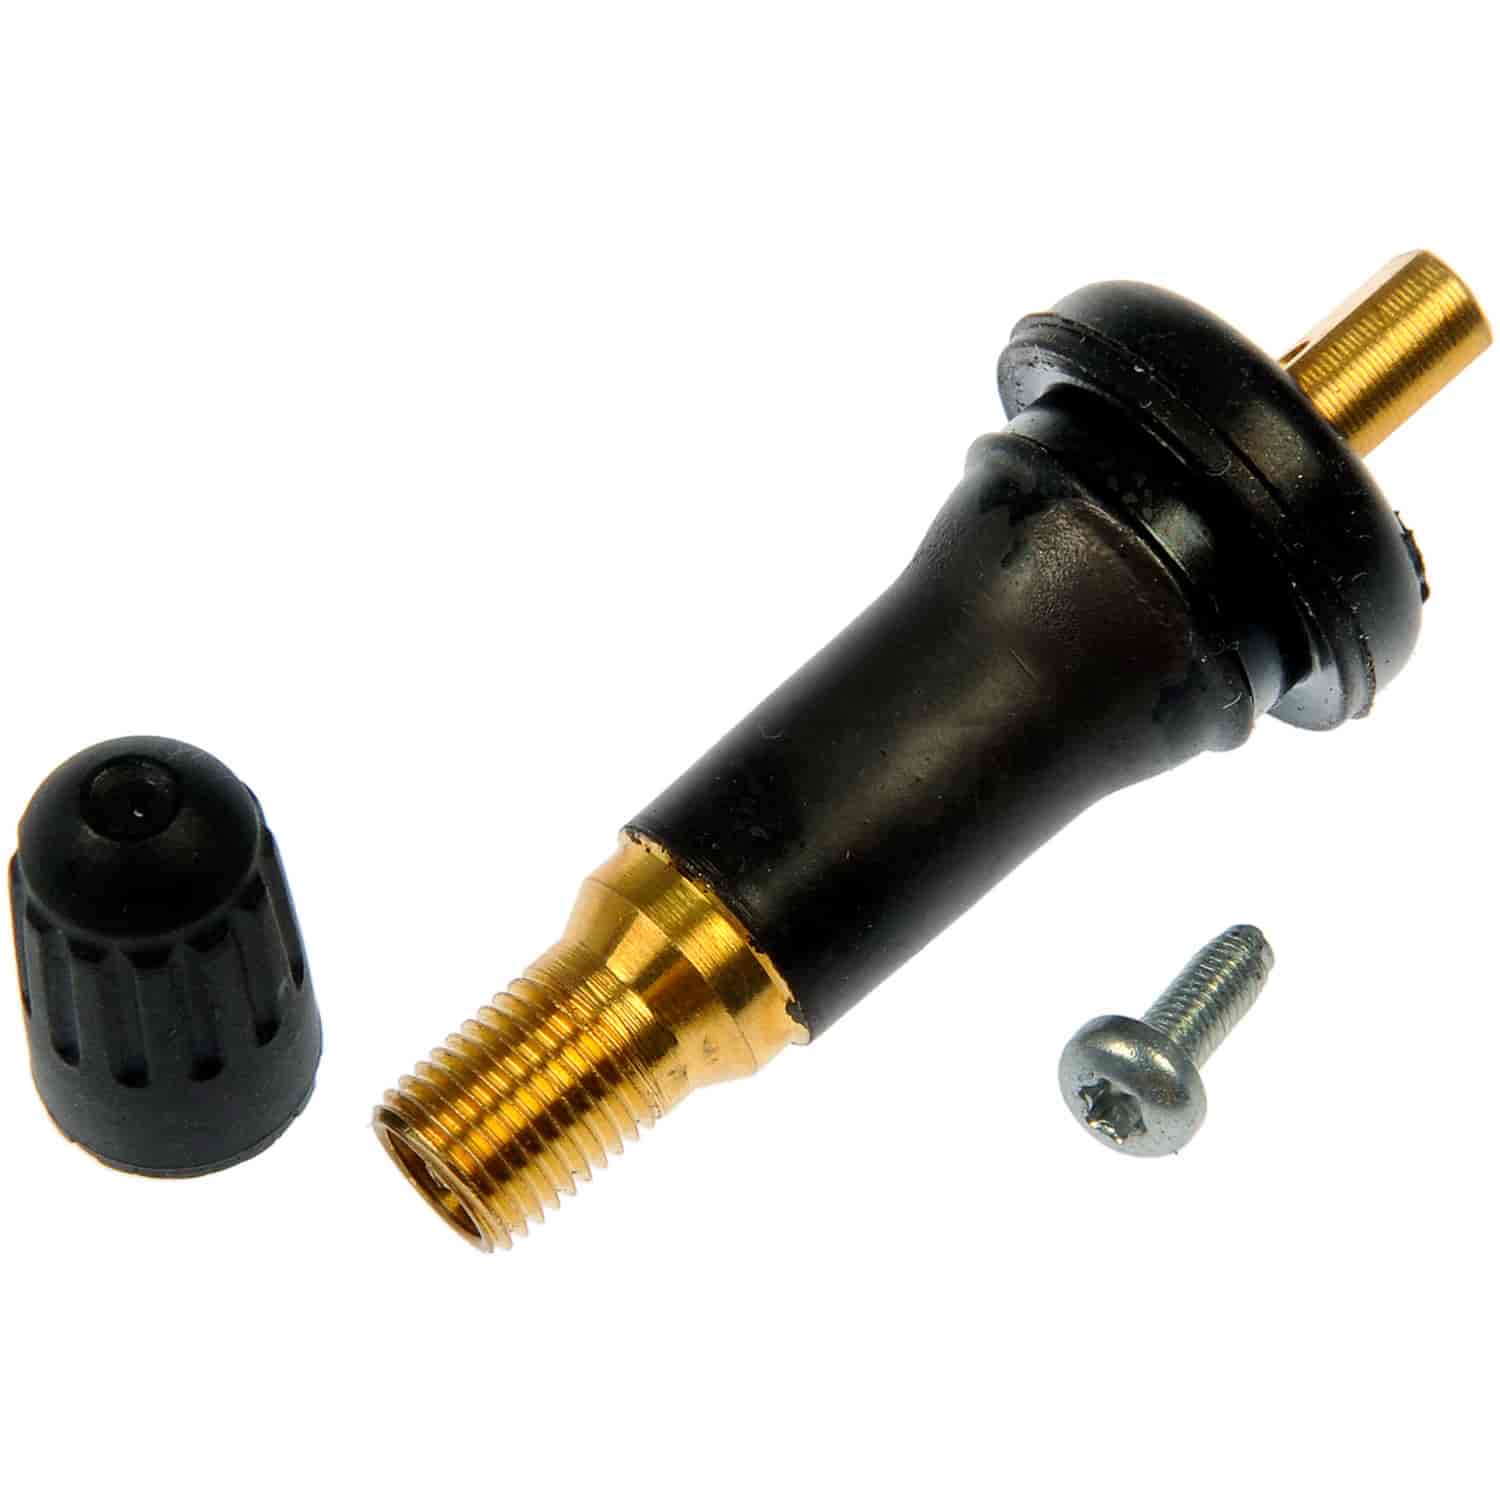 TPMS Service Kit Rubber Snap-In Valve Stem with